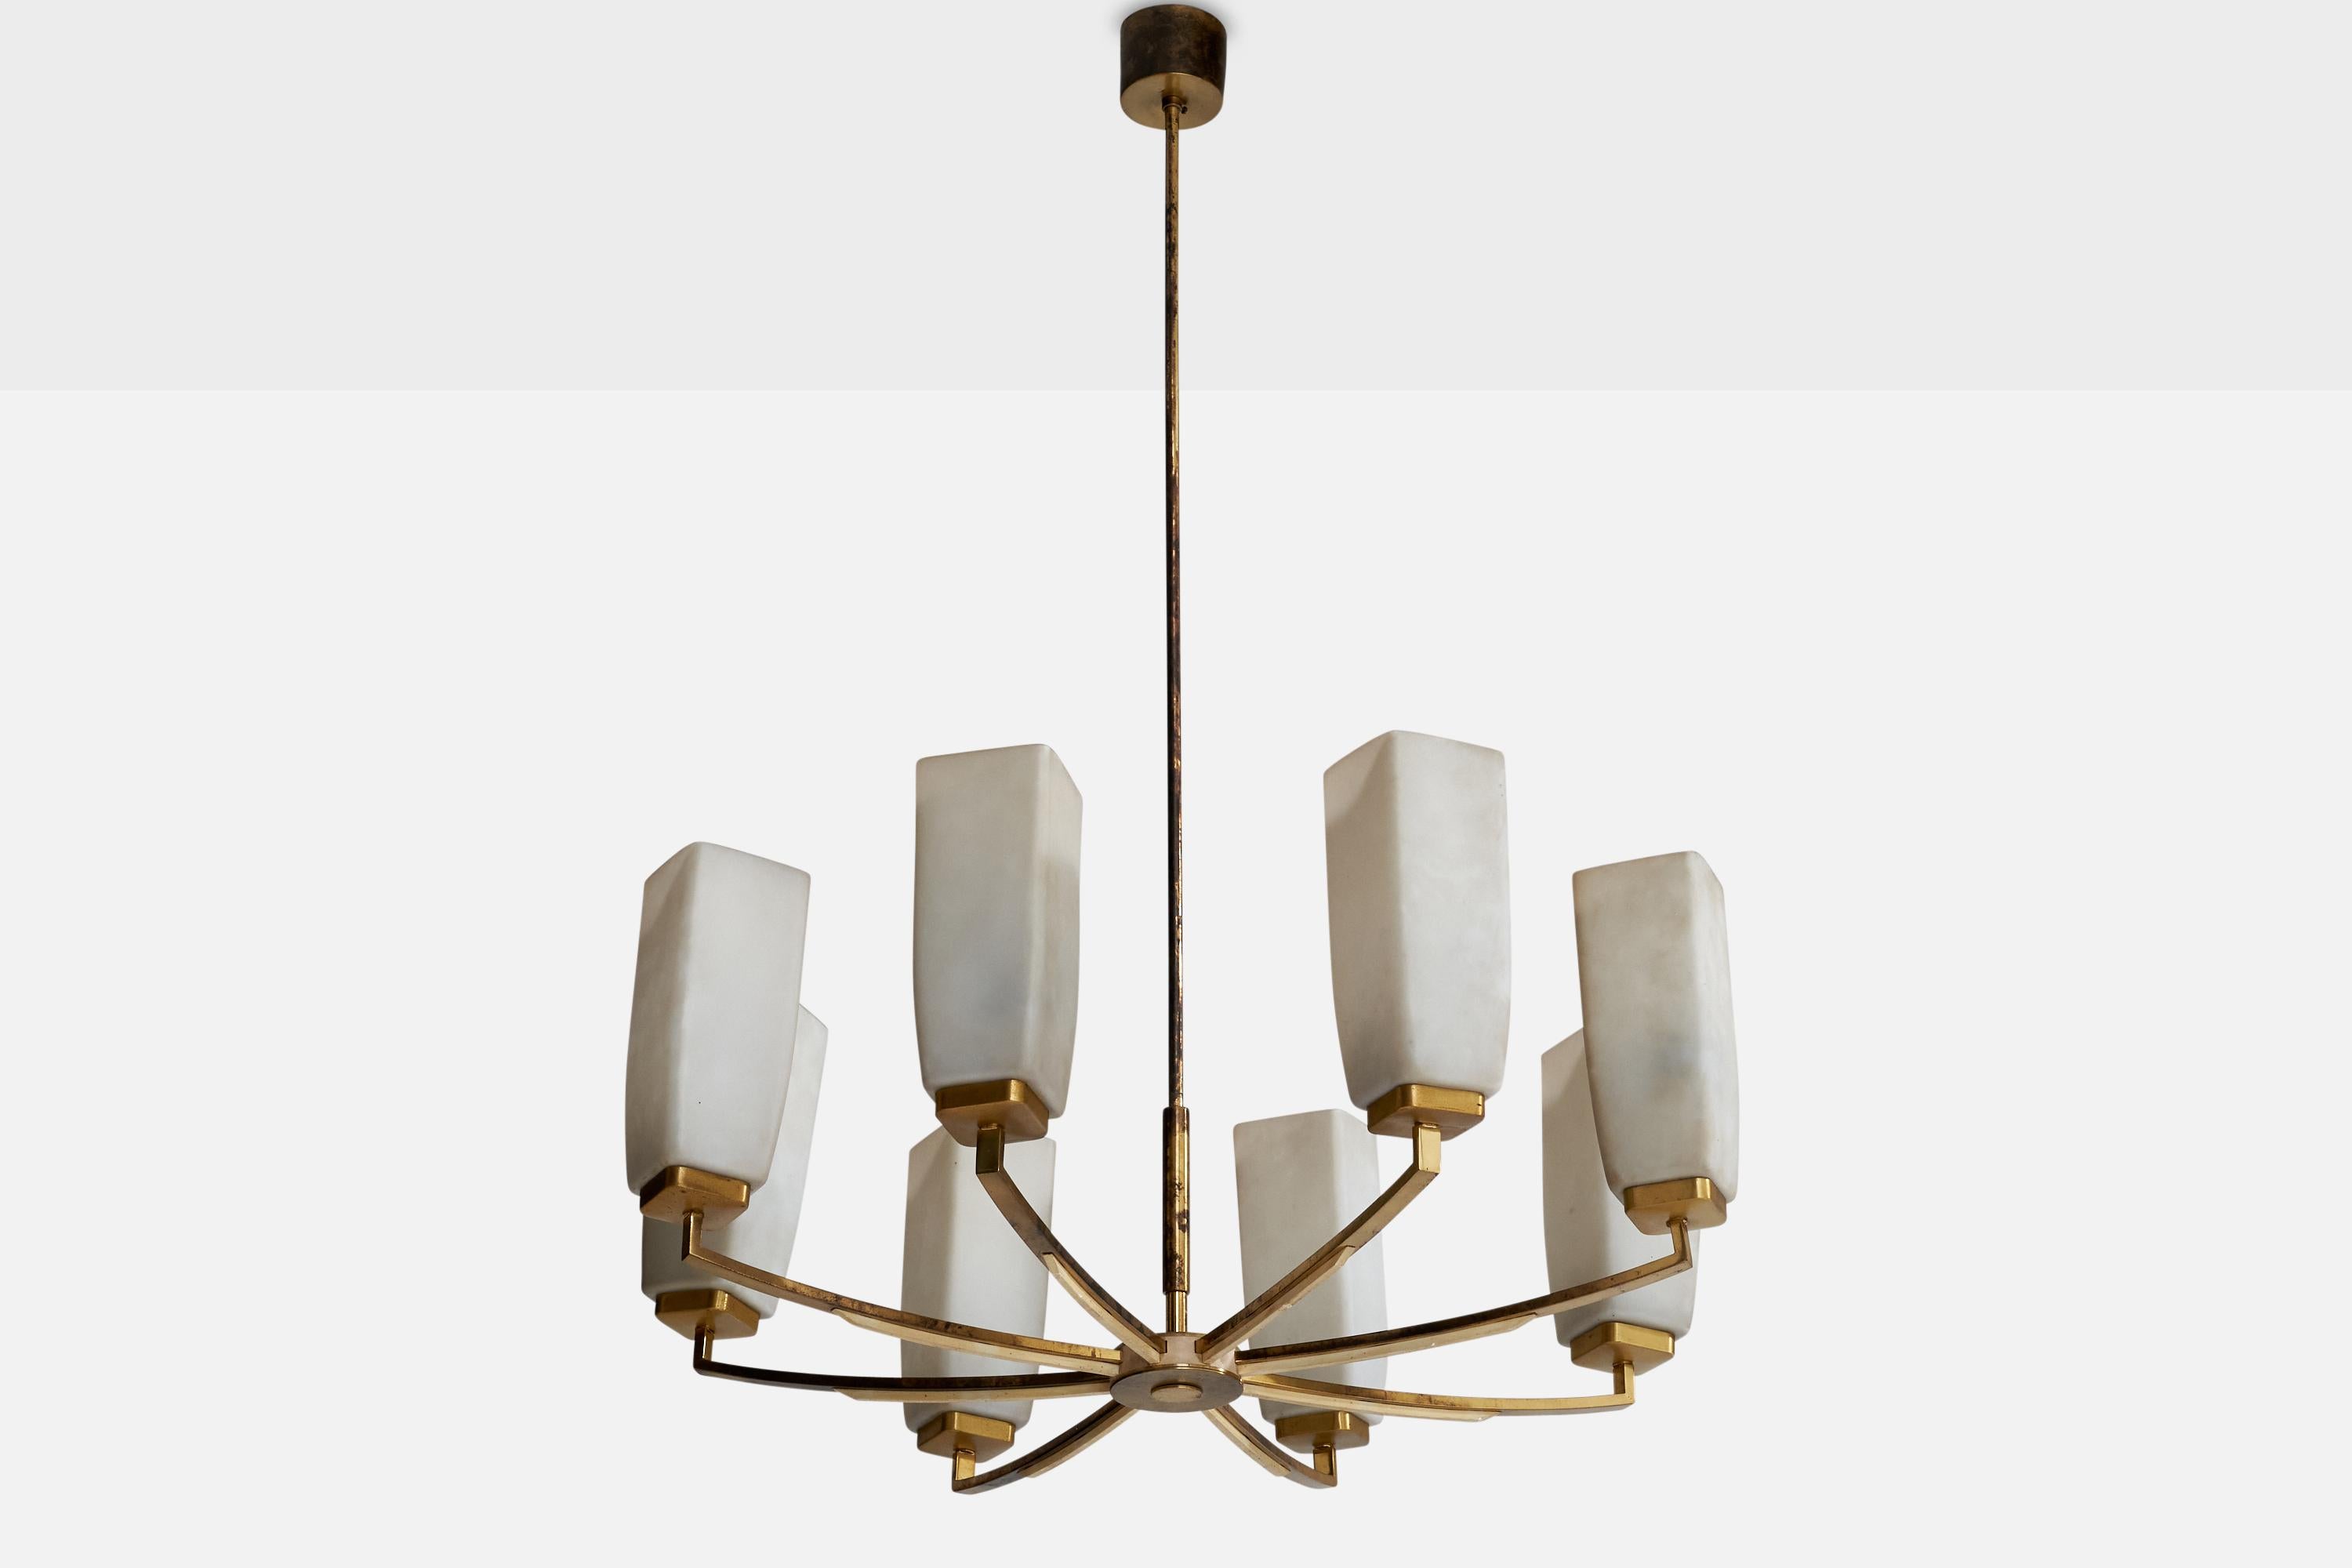 A sizeable brass and opaline glass chandelier designed and produced by Kaiser-Leuchten, Germany, c. 1950s.

Dimensions of canopy (inches): 2.3” H x 2.9” Diameter
Socket takes standard E-26 bulbs. 8 socketsThere is no maximum wattage stated on the